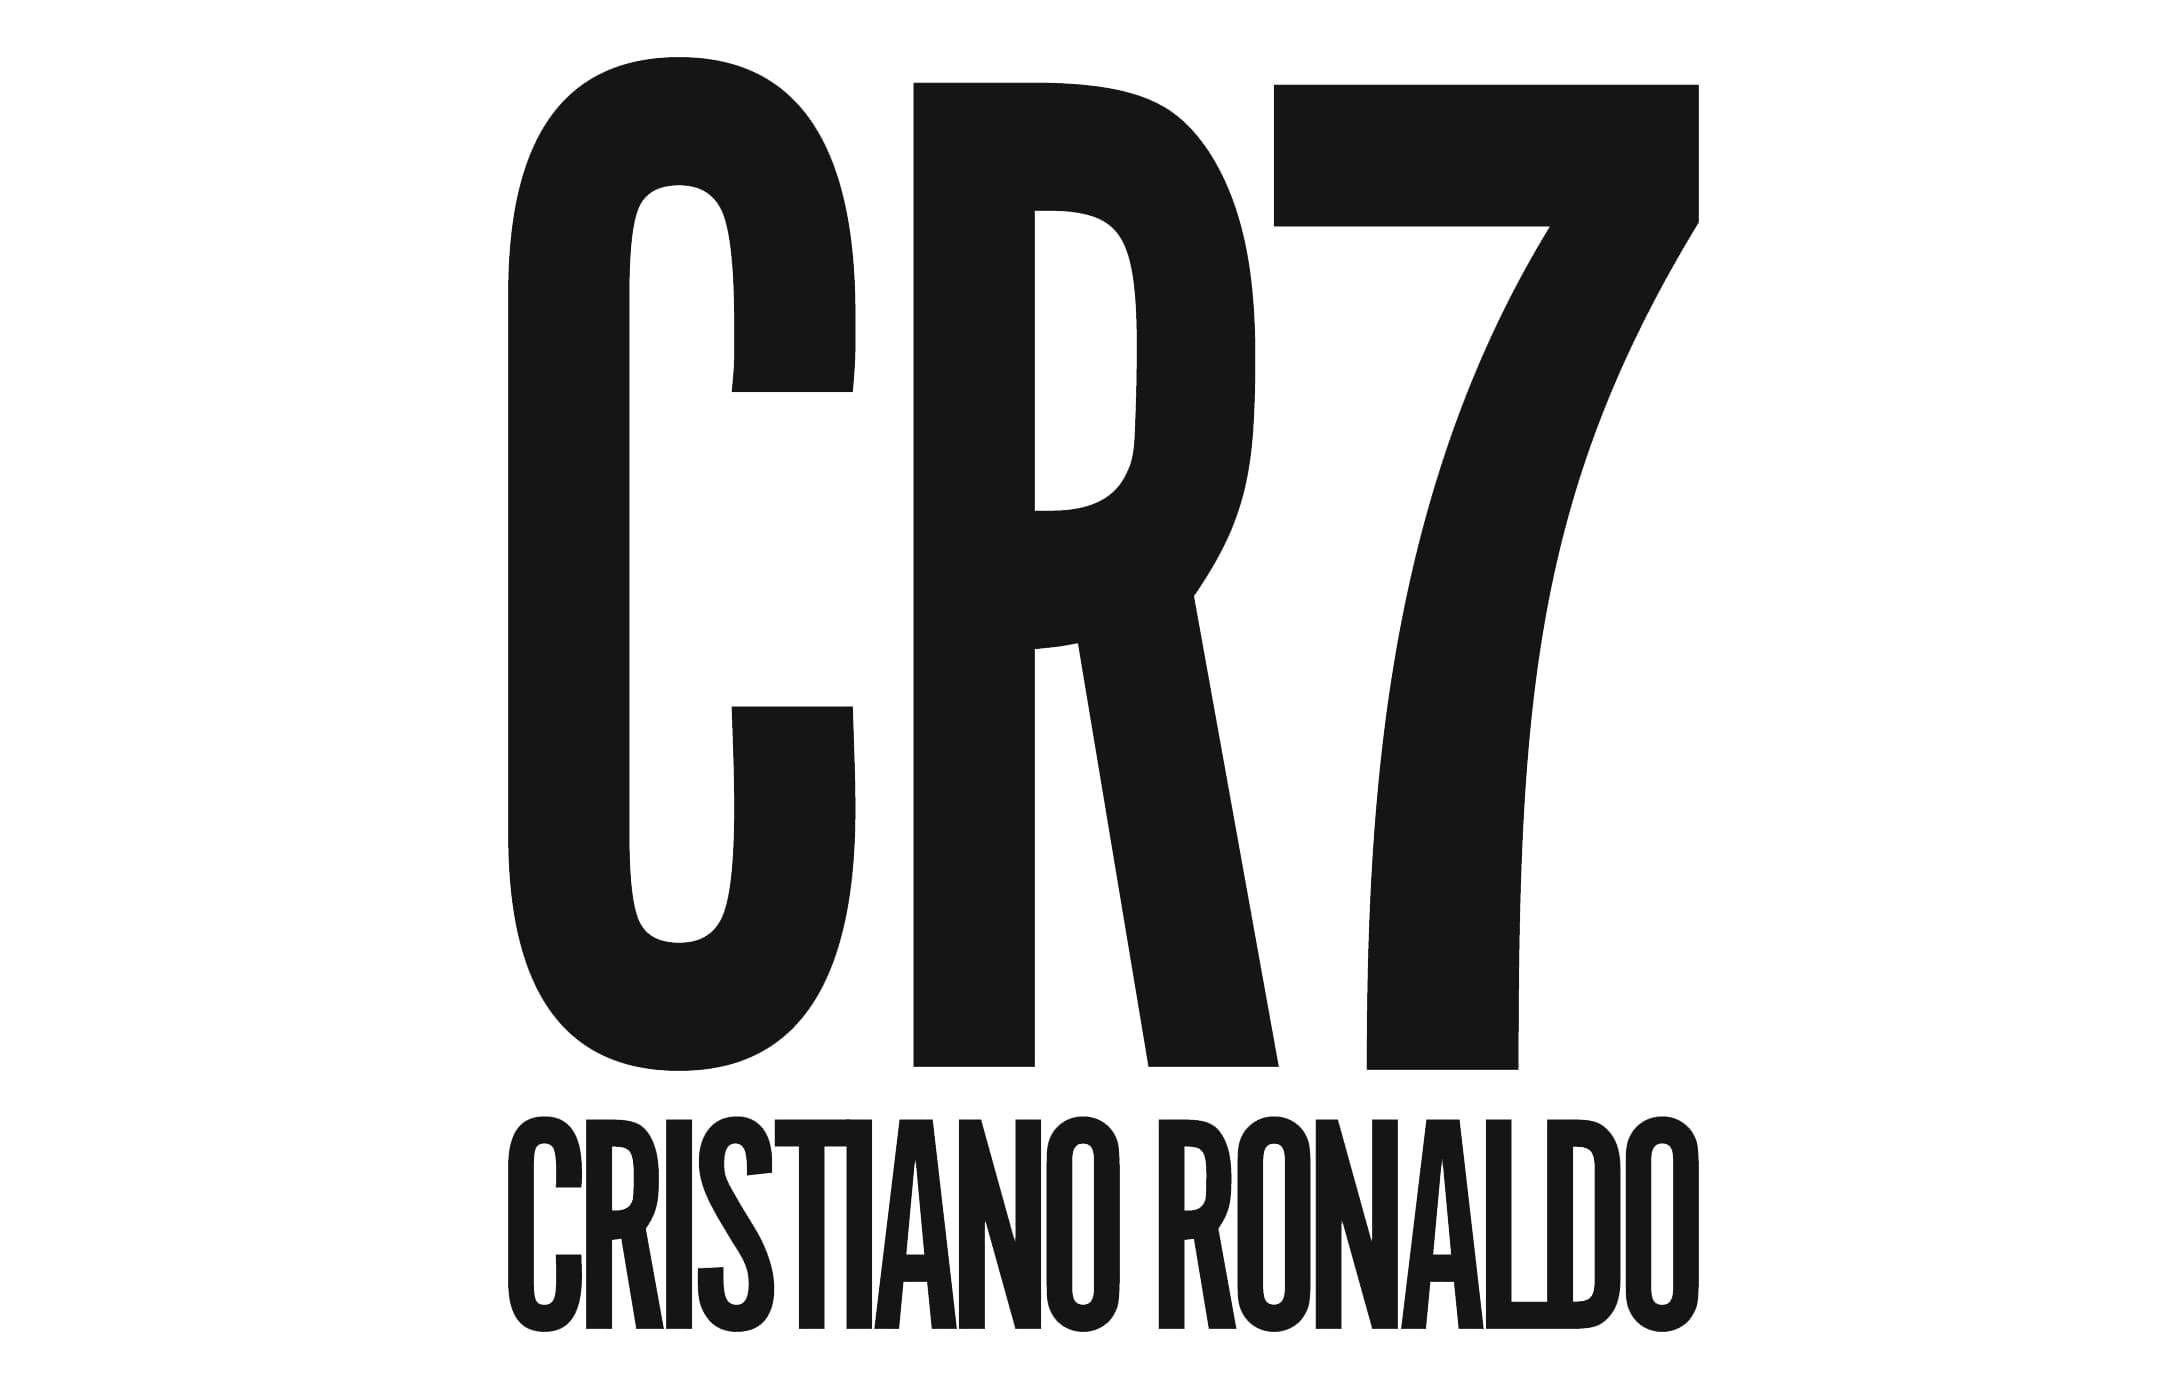 THE ICONIC NUMBER SEVEN: CRISTIANO RONALDO AND THE CR7 BRAND